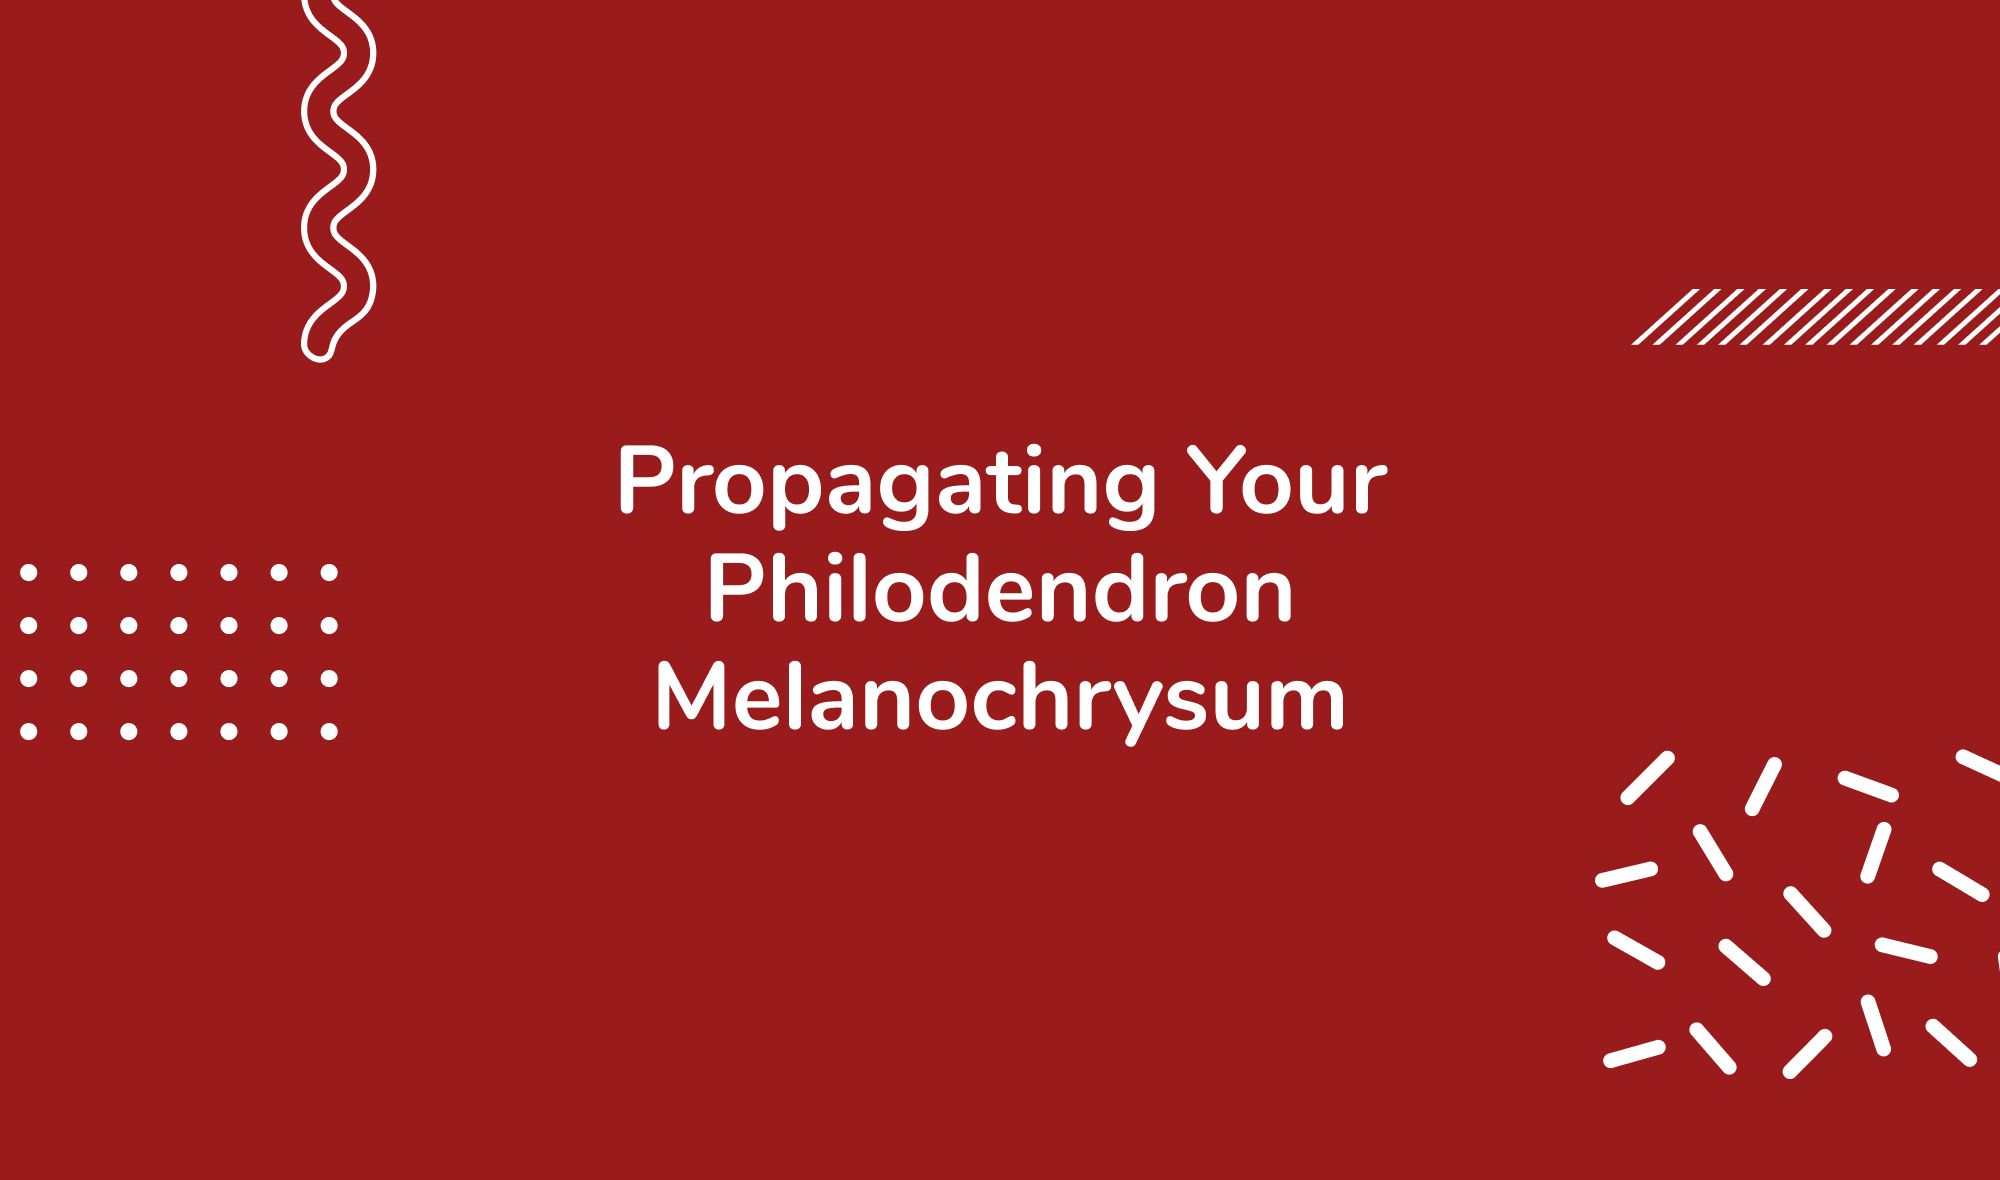 Propagating Your Philodendron Melanochrysum